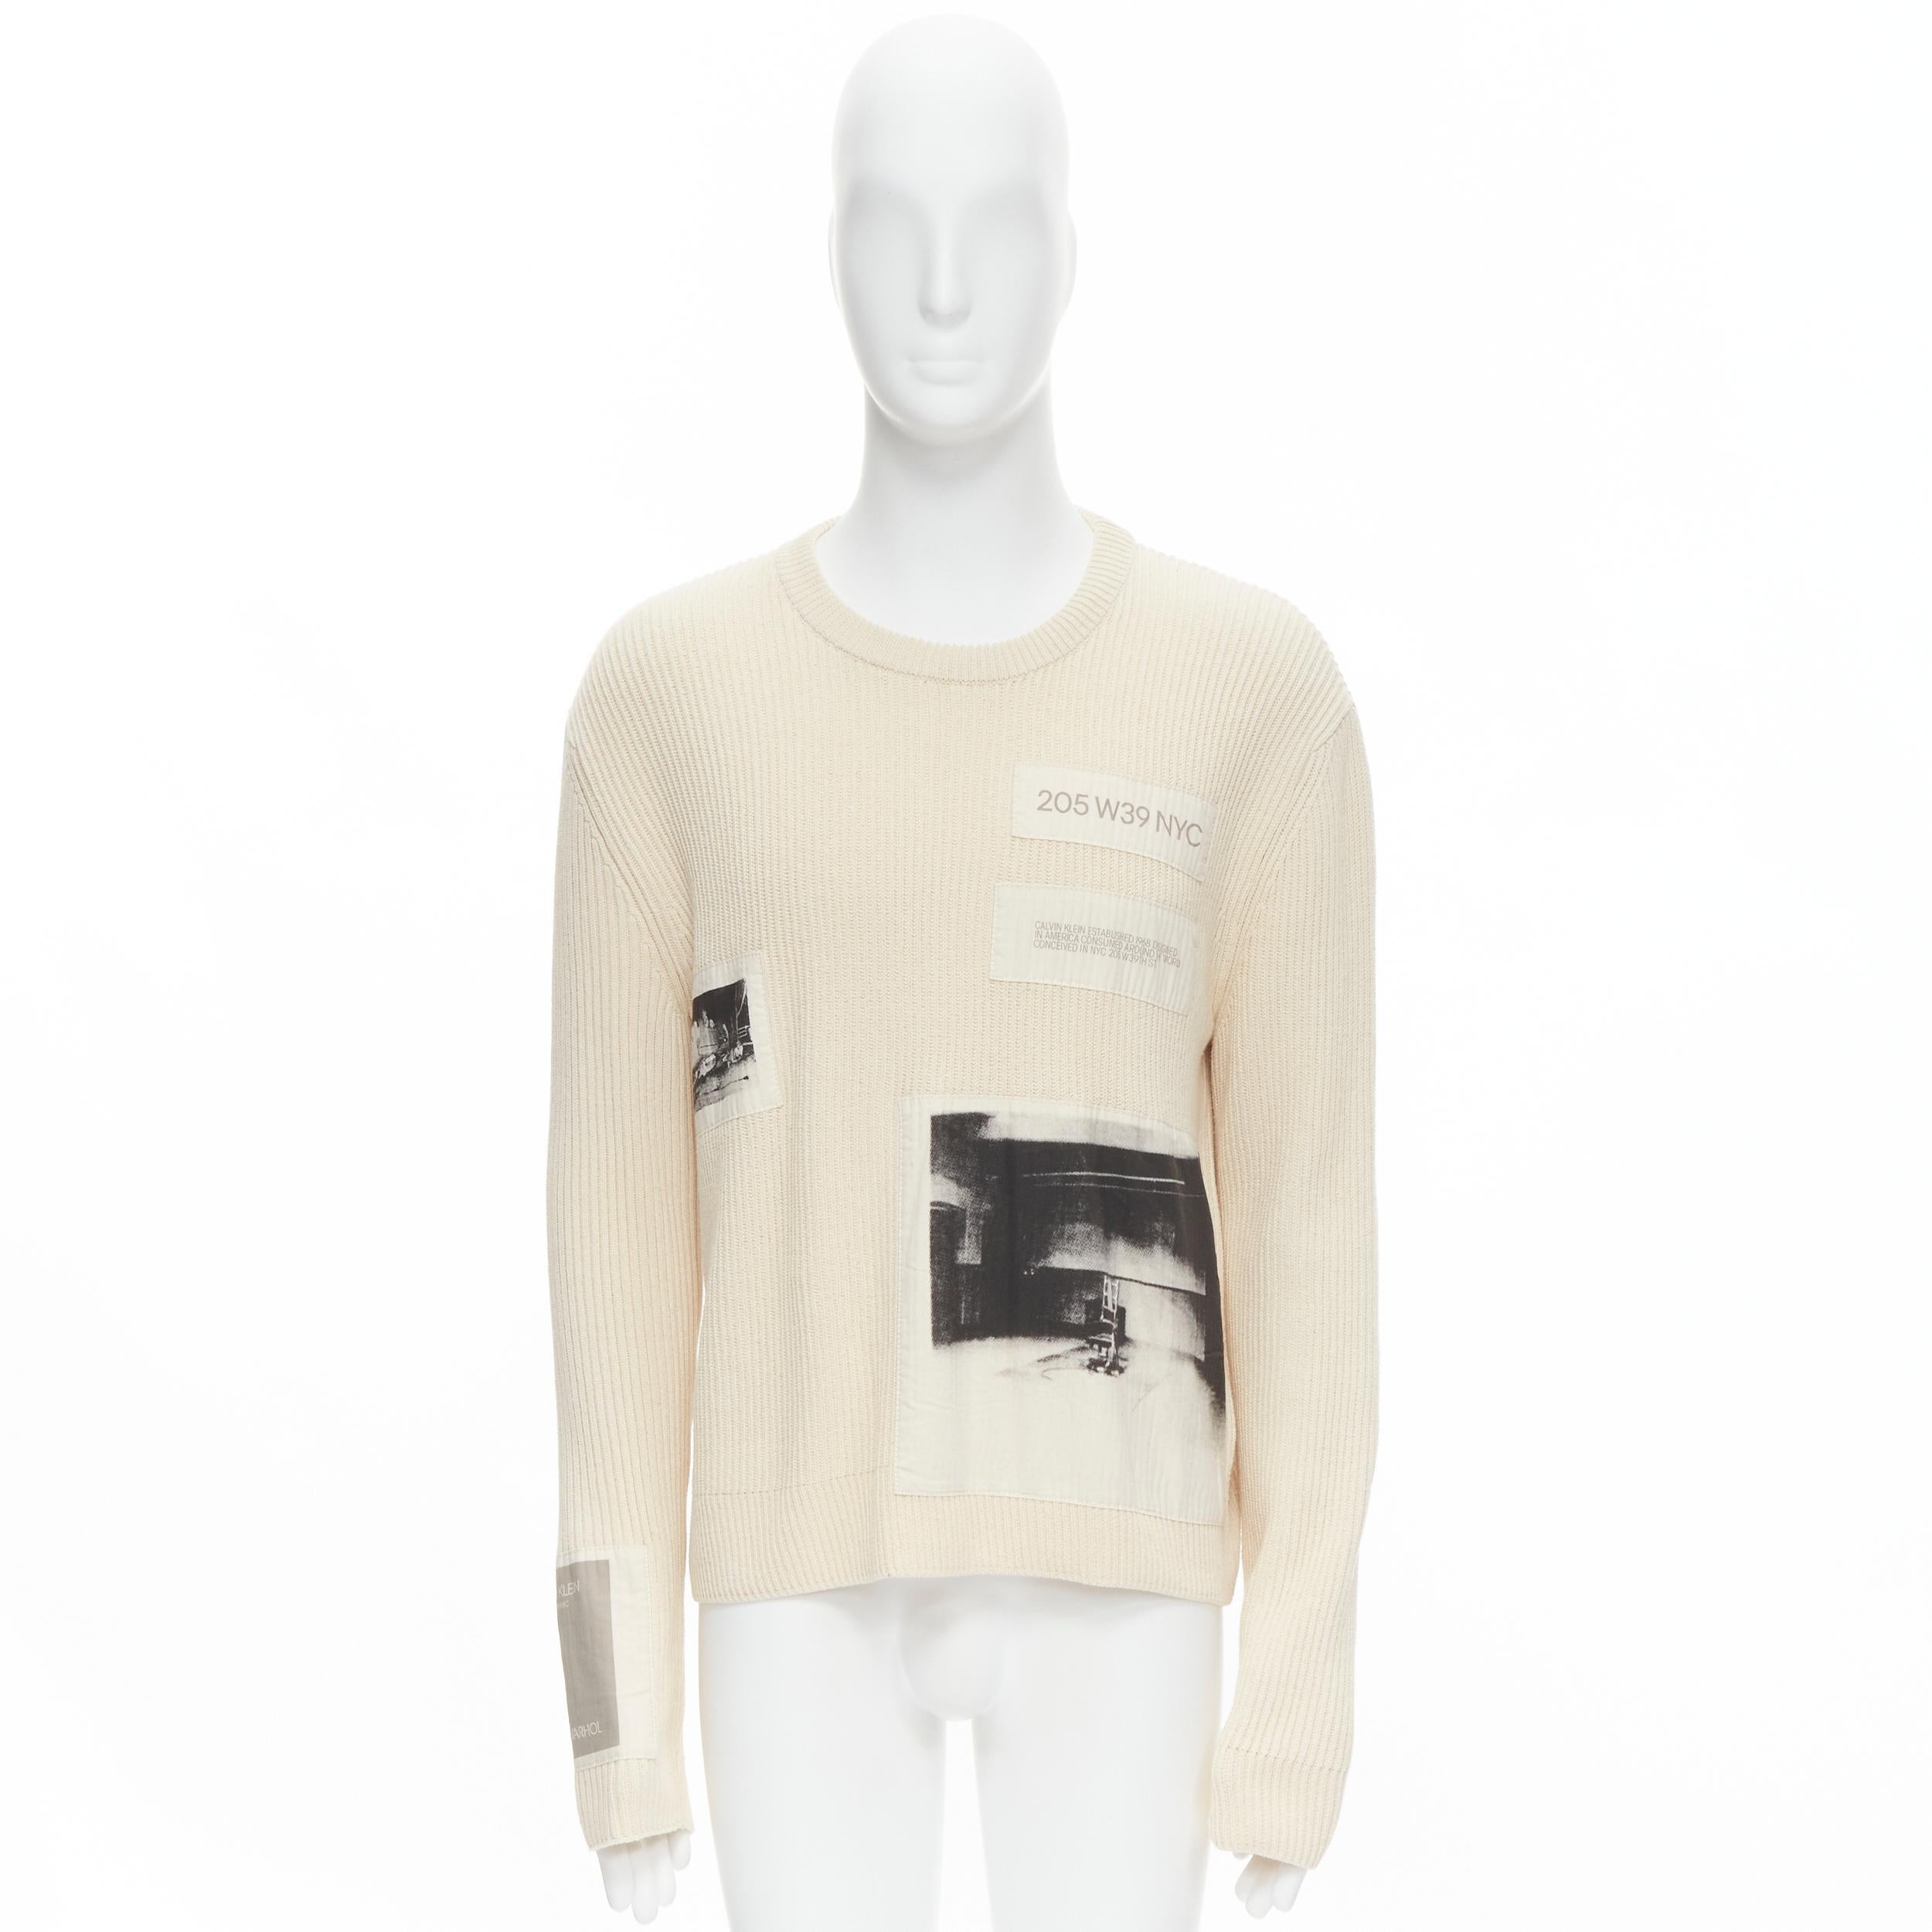 CALVIN KLEIN 295W39NYV Andy Warhol patchwork beige ribbed cotton sweater M 2